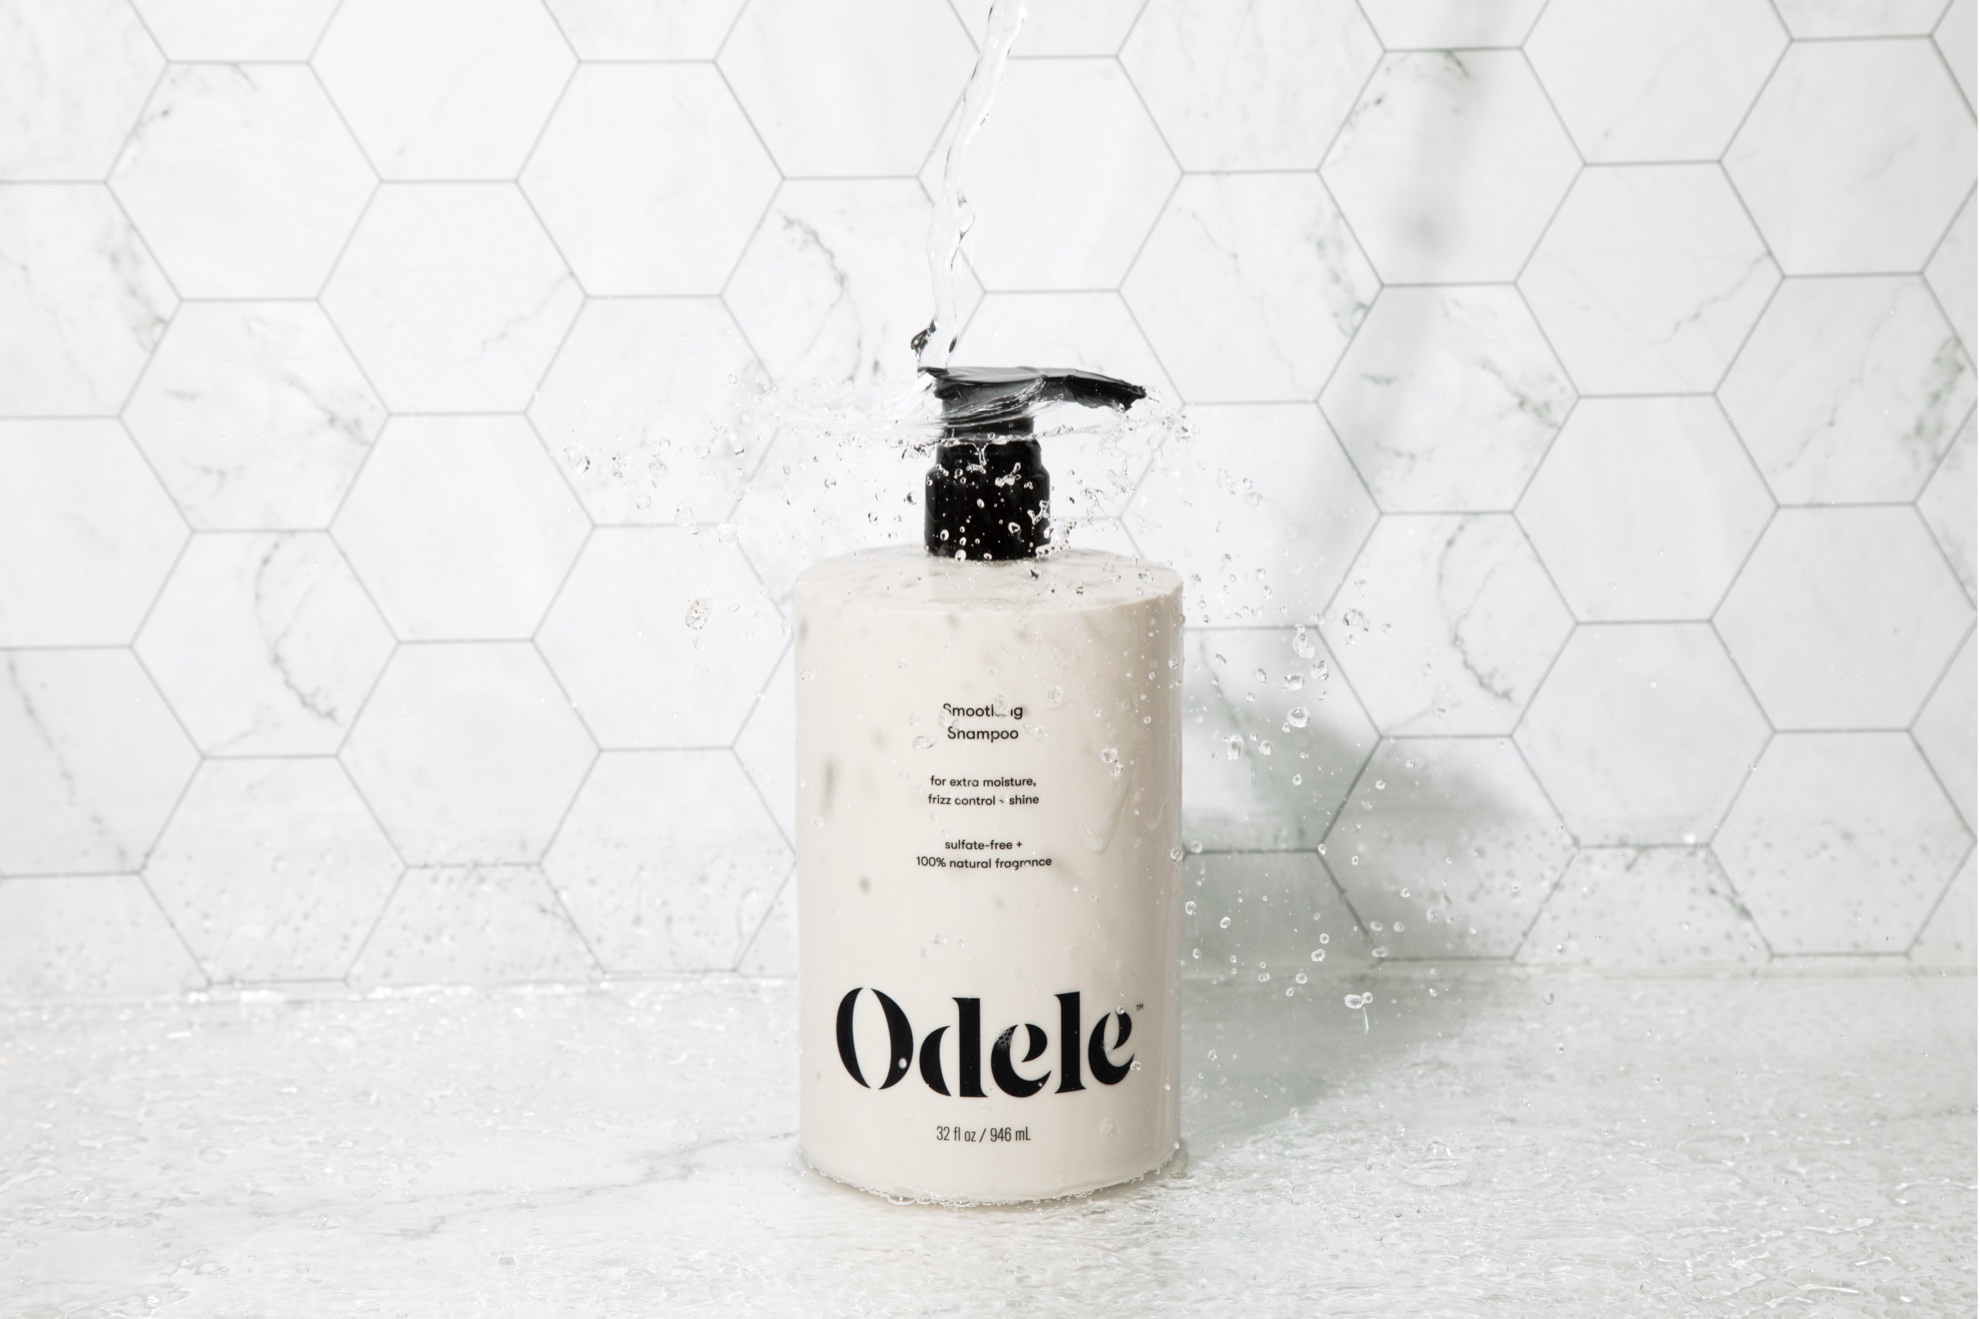 odele hair care product photo with water being poured on product in bathroom setting